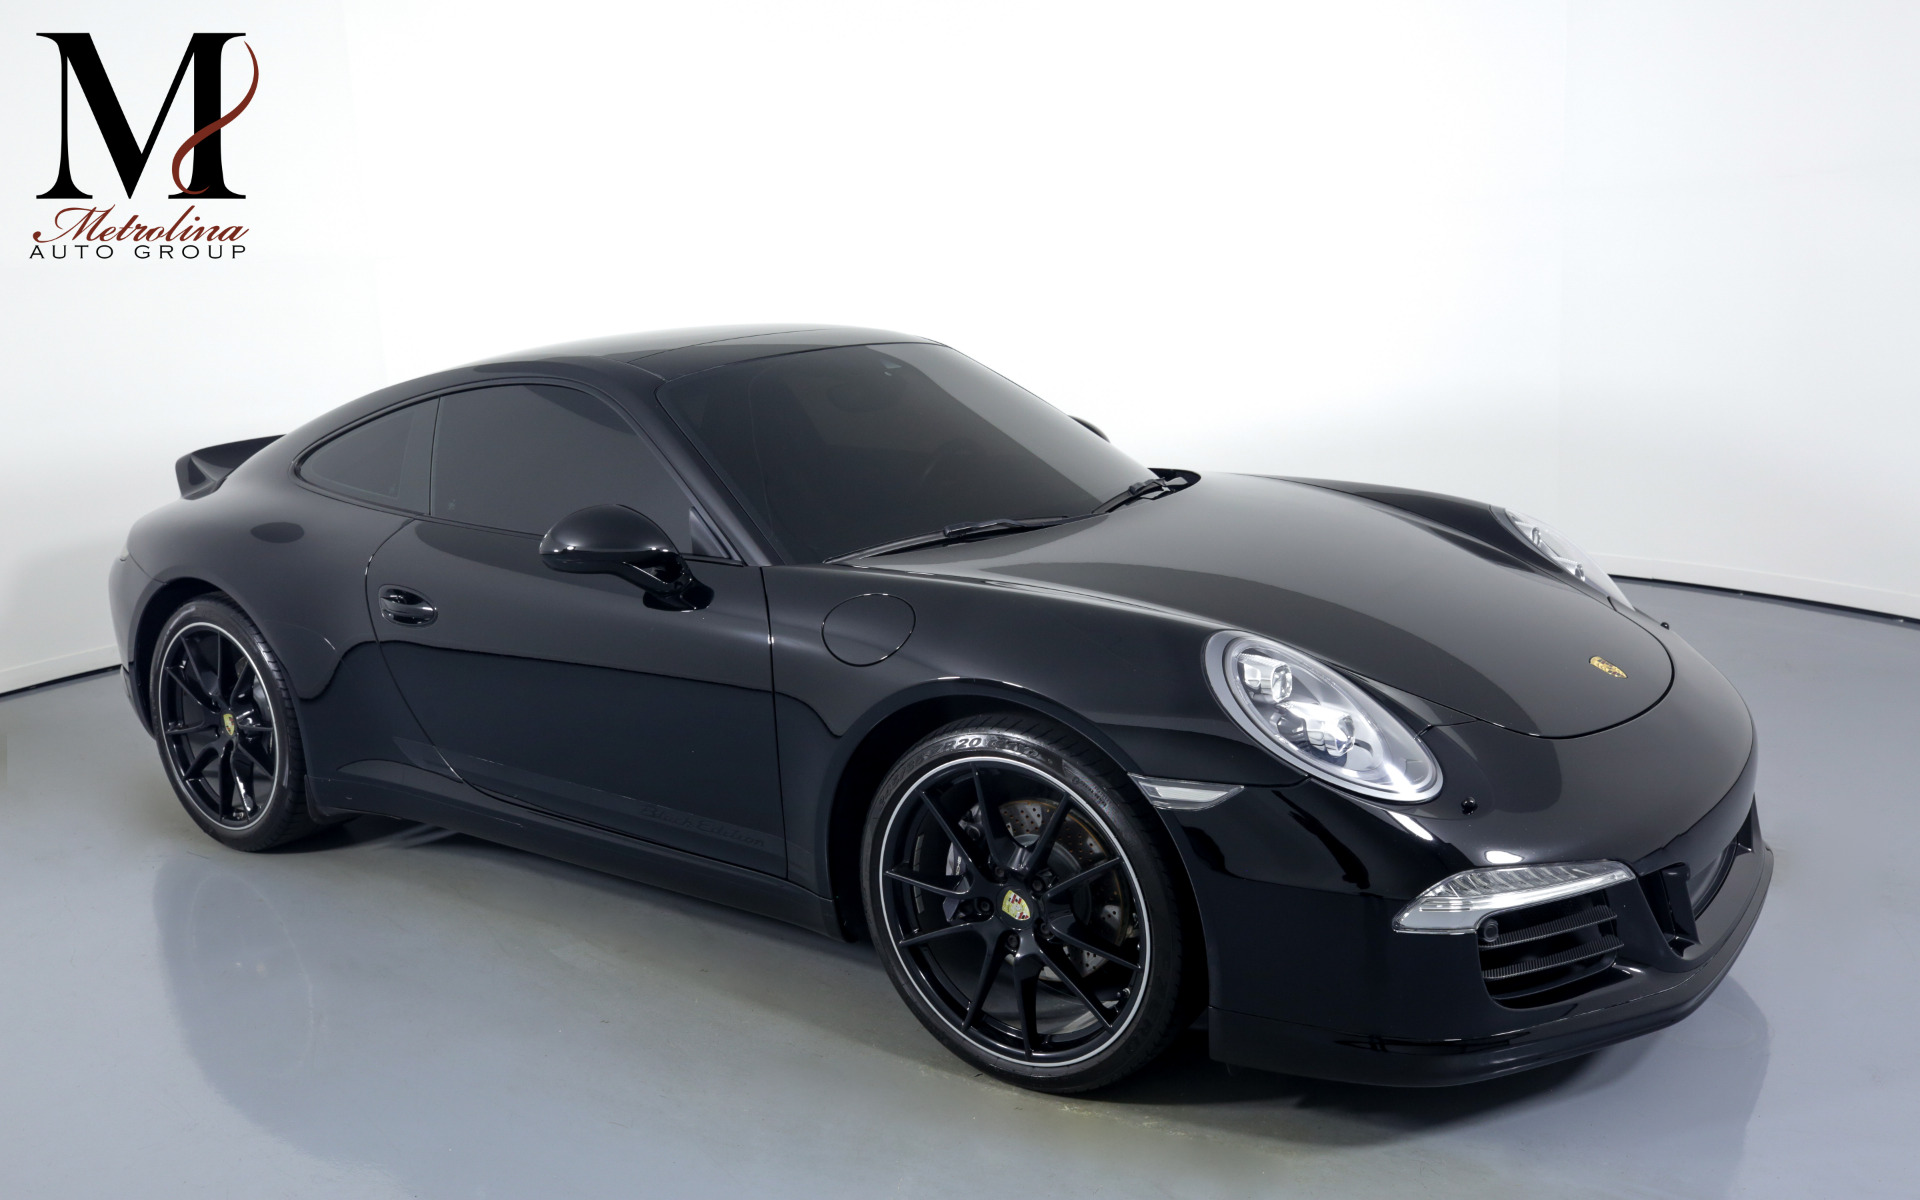 Used 2016 Porsche 911 Carrera Black Edition for sale $78,996 at Metrolina Auto Group in Charlotte NC 28217 - 1